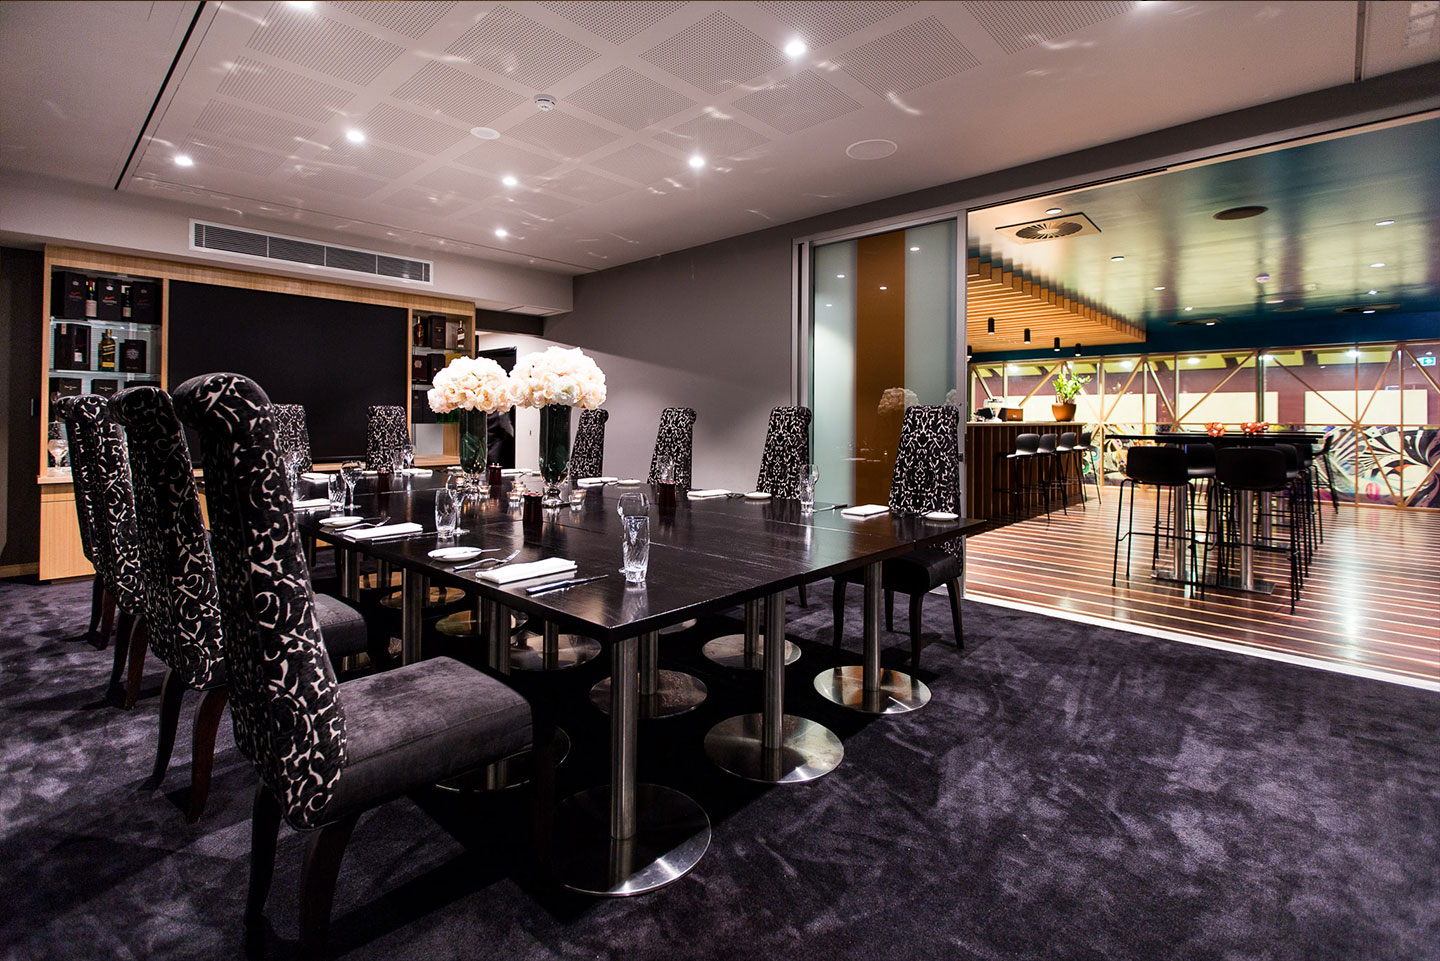 South Perth's most exclusive private dining facilities